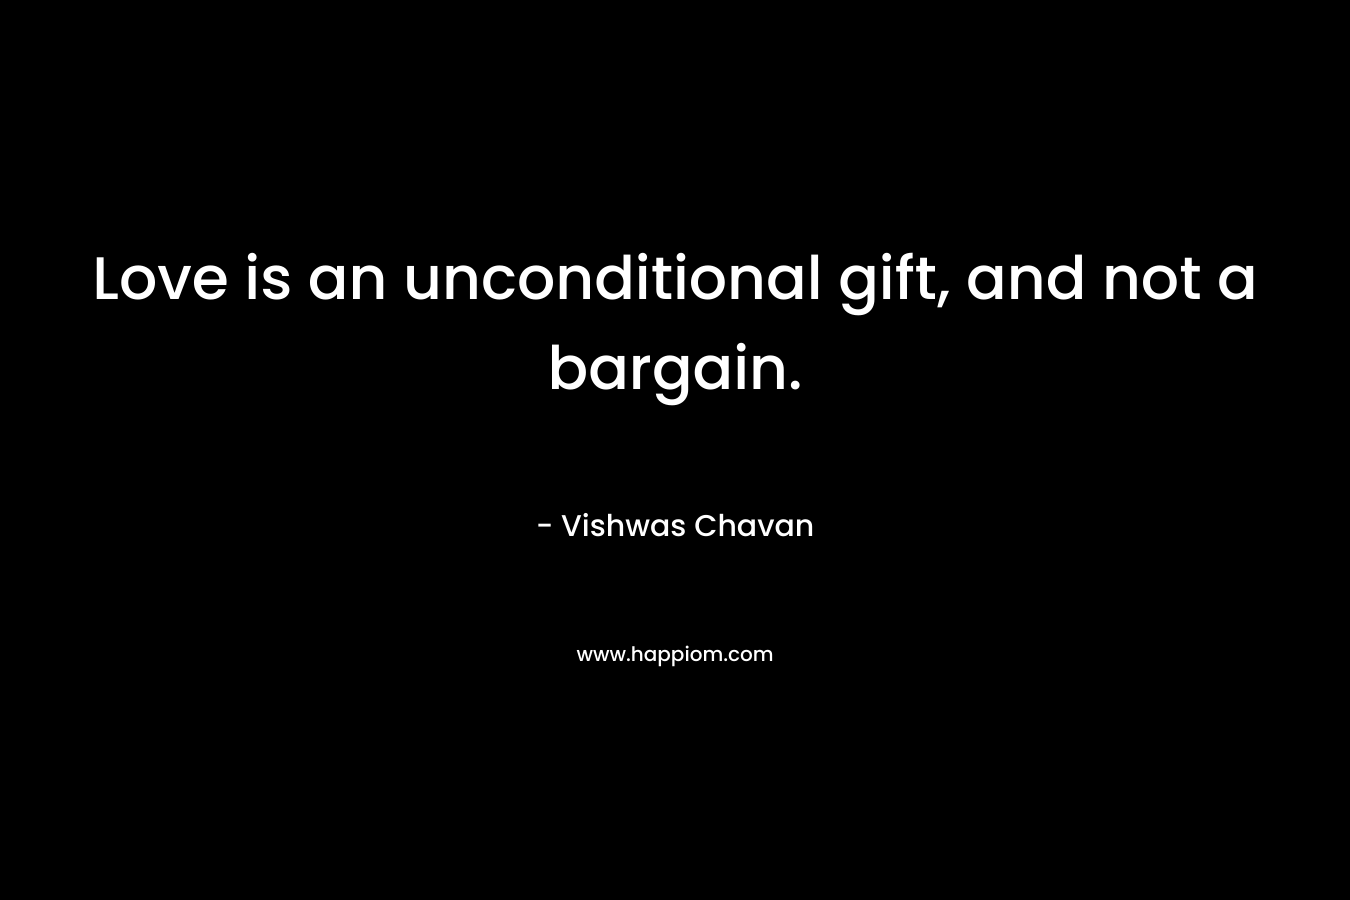 Love is an unconditional gift, and not a bargain. – Vishwas Chavan